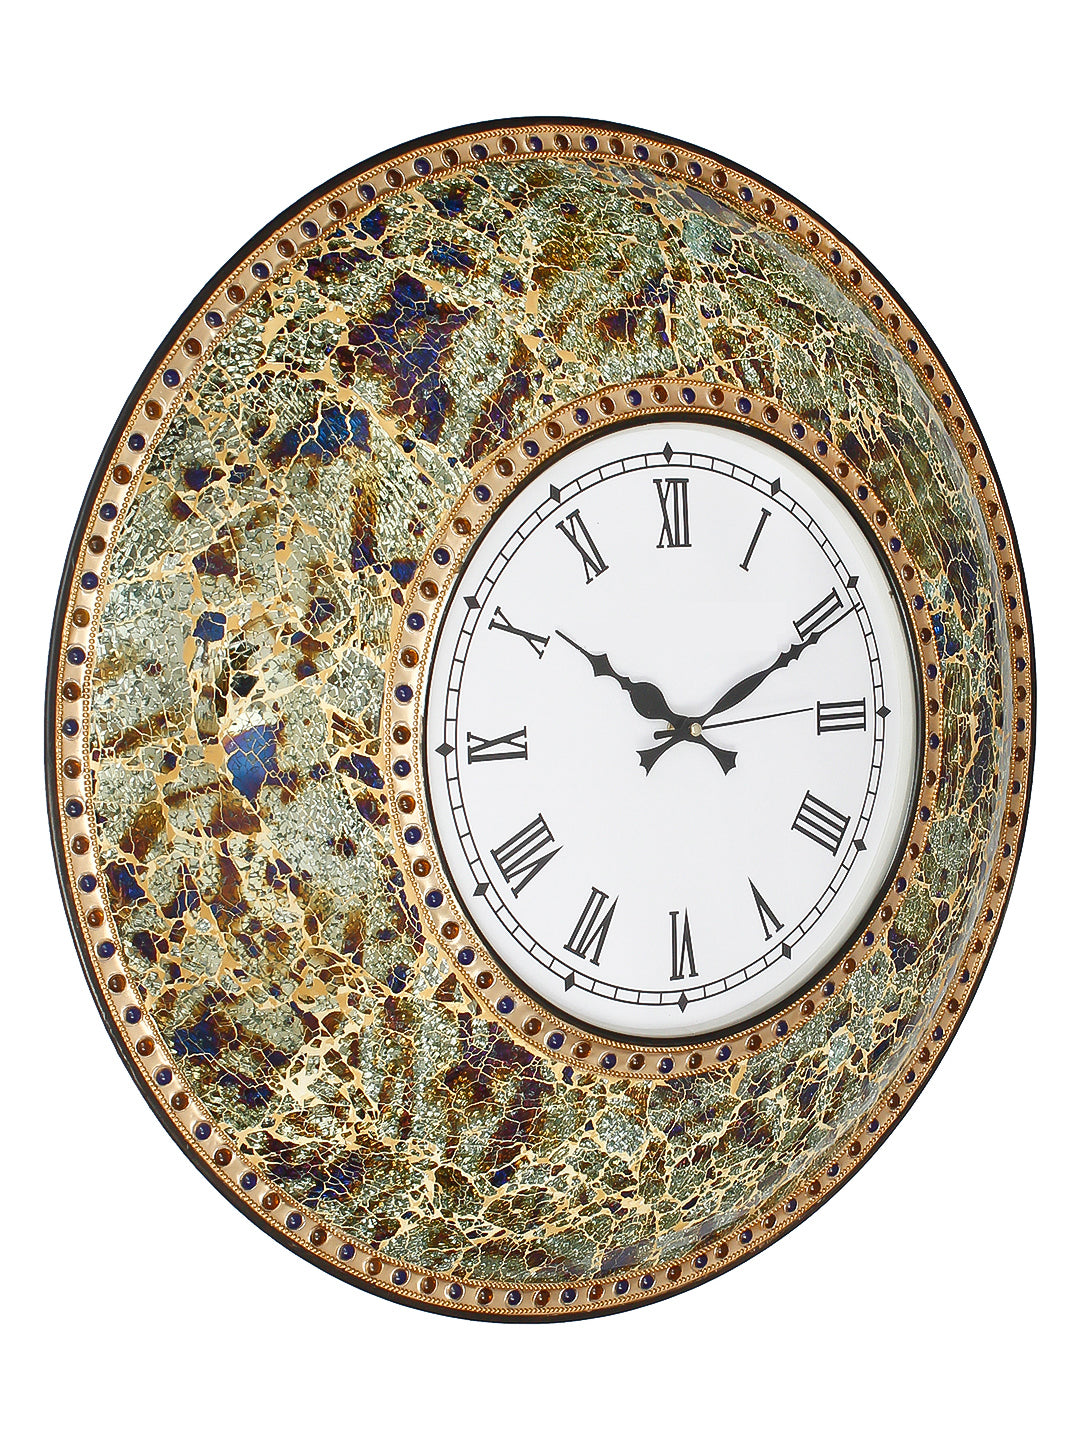 Multicolor Mosaic Glass & Wood Round Handcrafted Analog Ethnic Luxury Roman Numeral Wall Clock 4